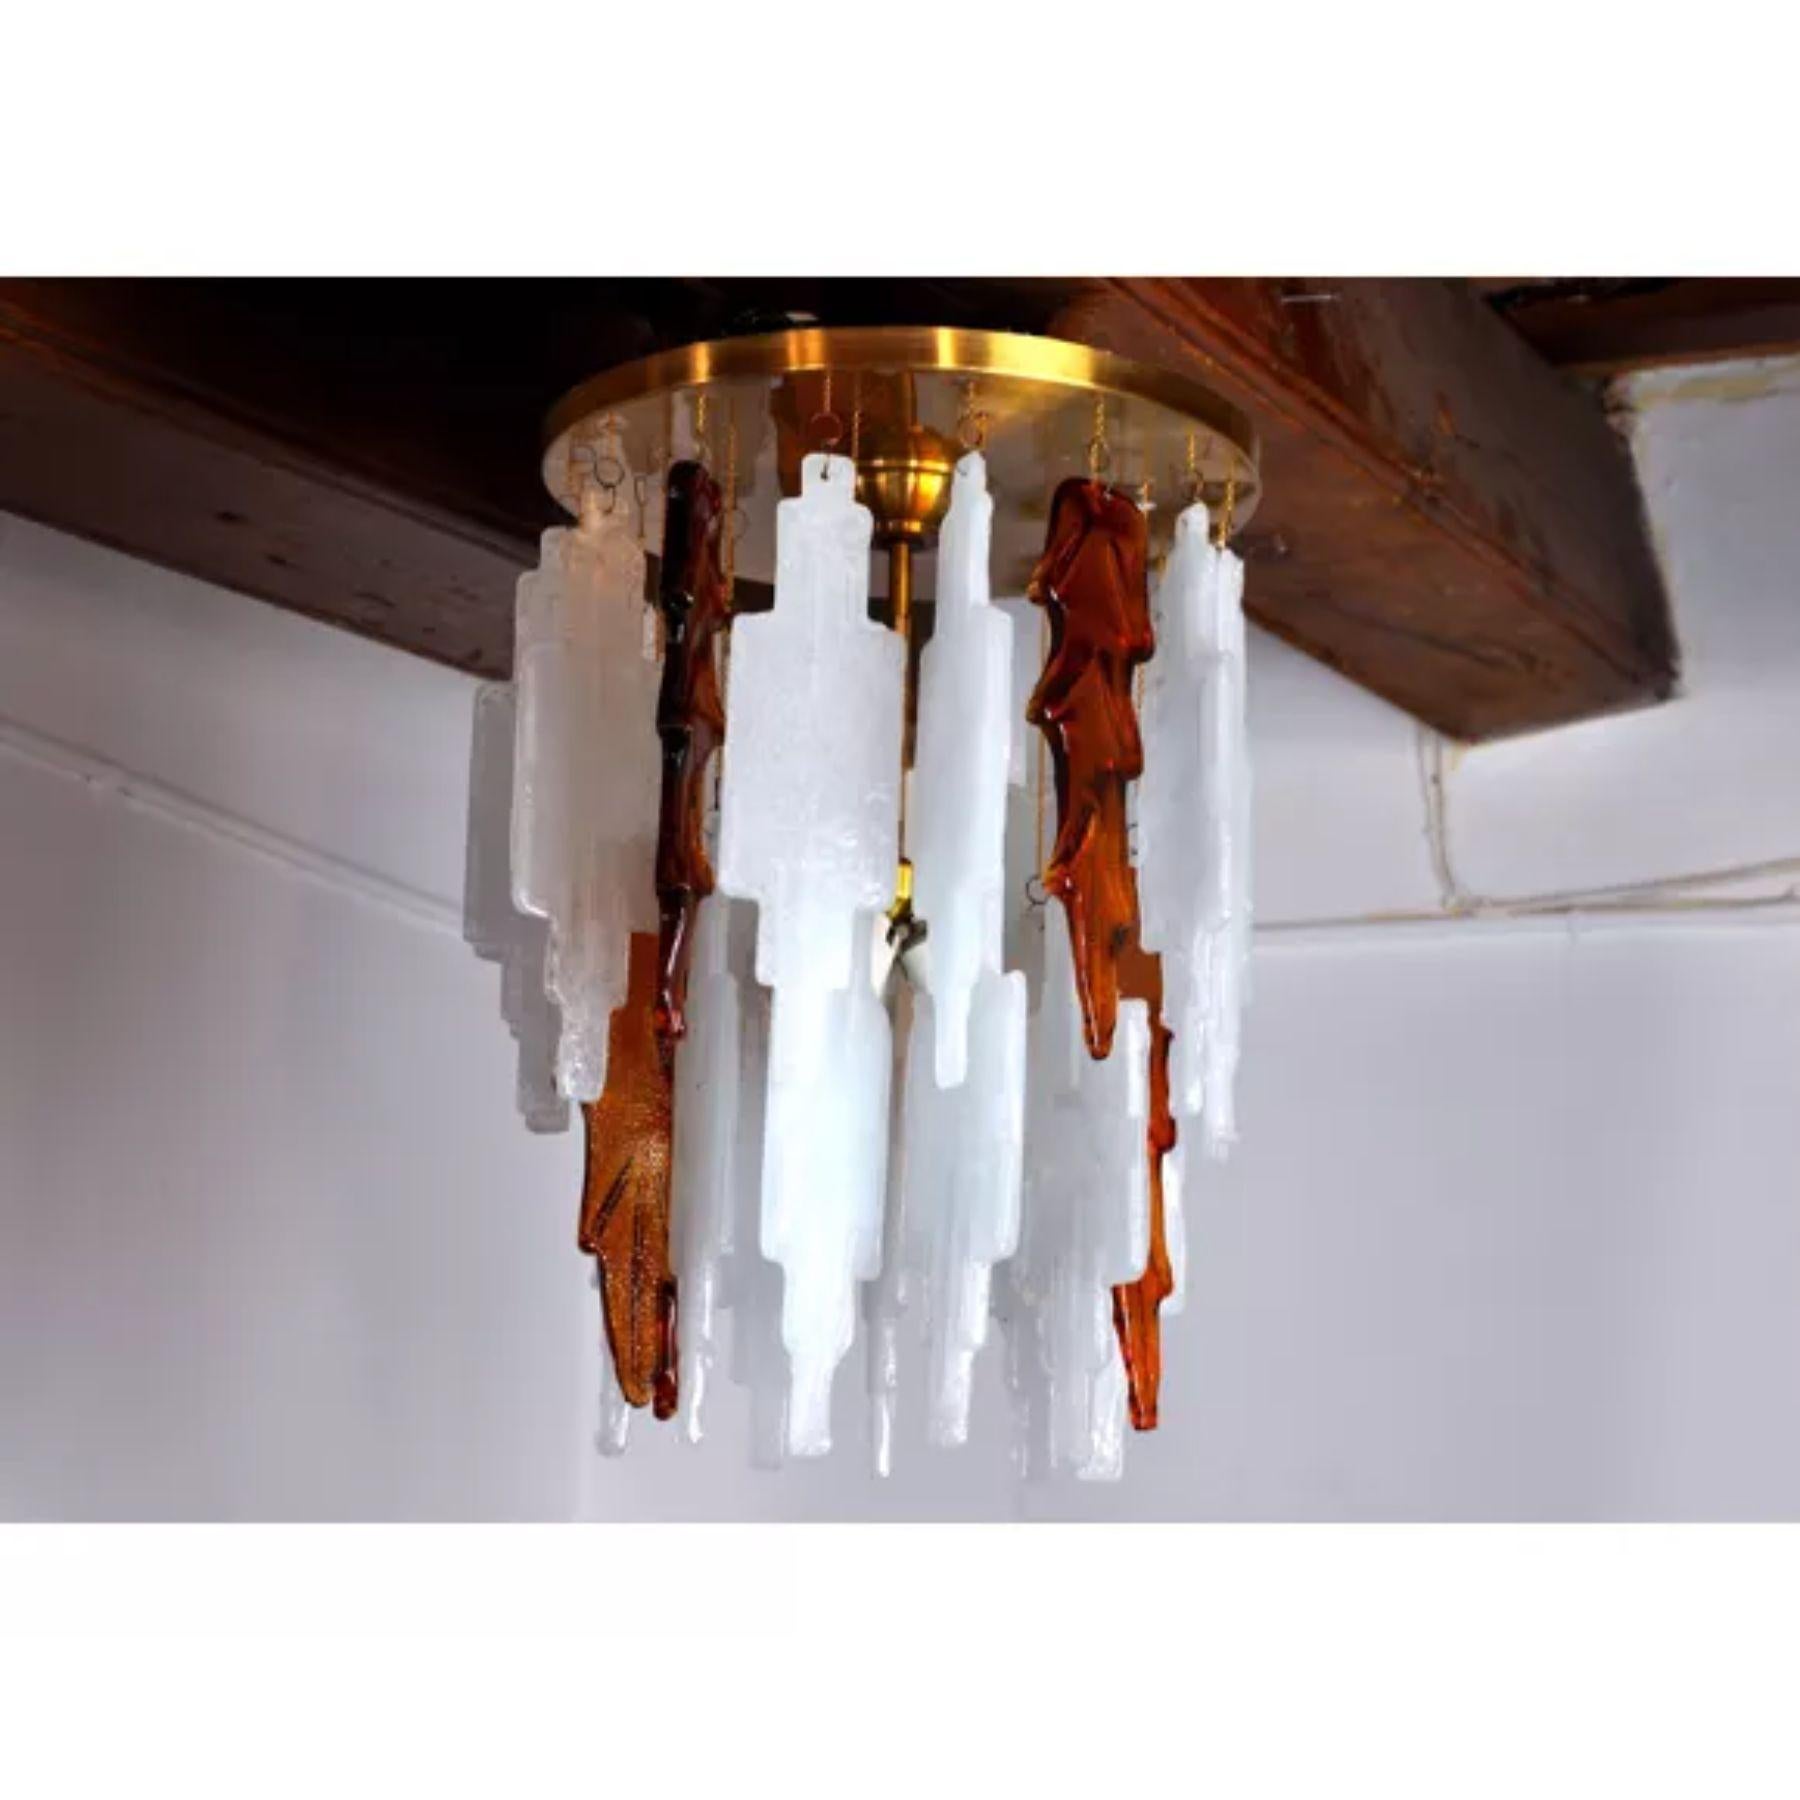 Superb and rare two-tone poliarte pendant lamp, designed and produced by albani poli in murano (italy) in the 70s. Composed of more two-tone, white and orange blown crystals and a brass structure, this ceiling lamp is in superb condition. Rare